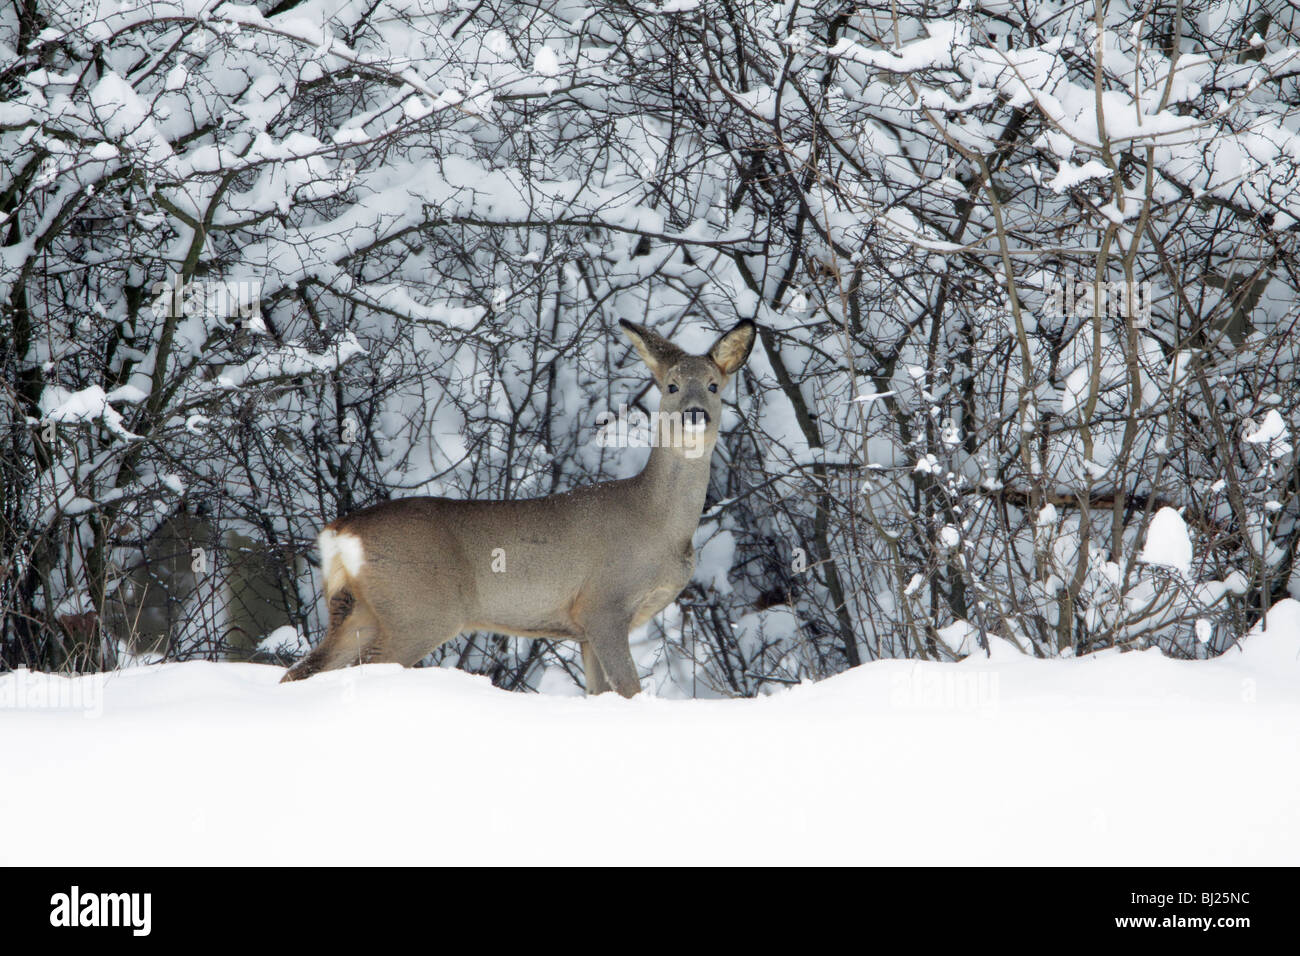 Roe deer, Capreolus capreolus, at edge of snow covered woodland in winter, Harz mountains, Lower Saxony, Germany  Stock Photo